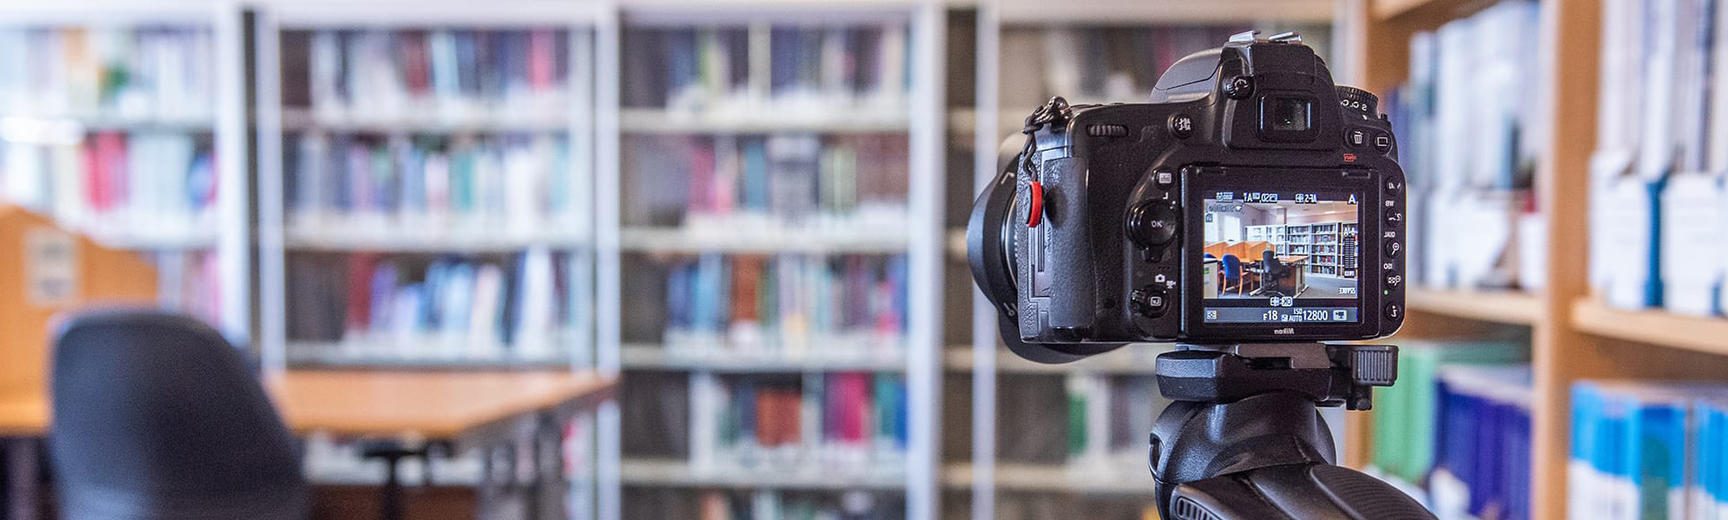 A digital camera positioned in front of a room of bookshelves